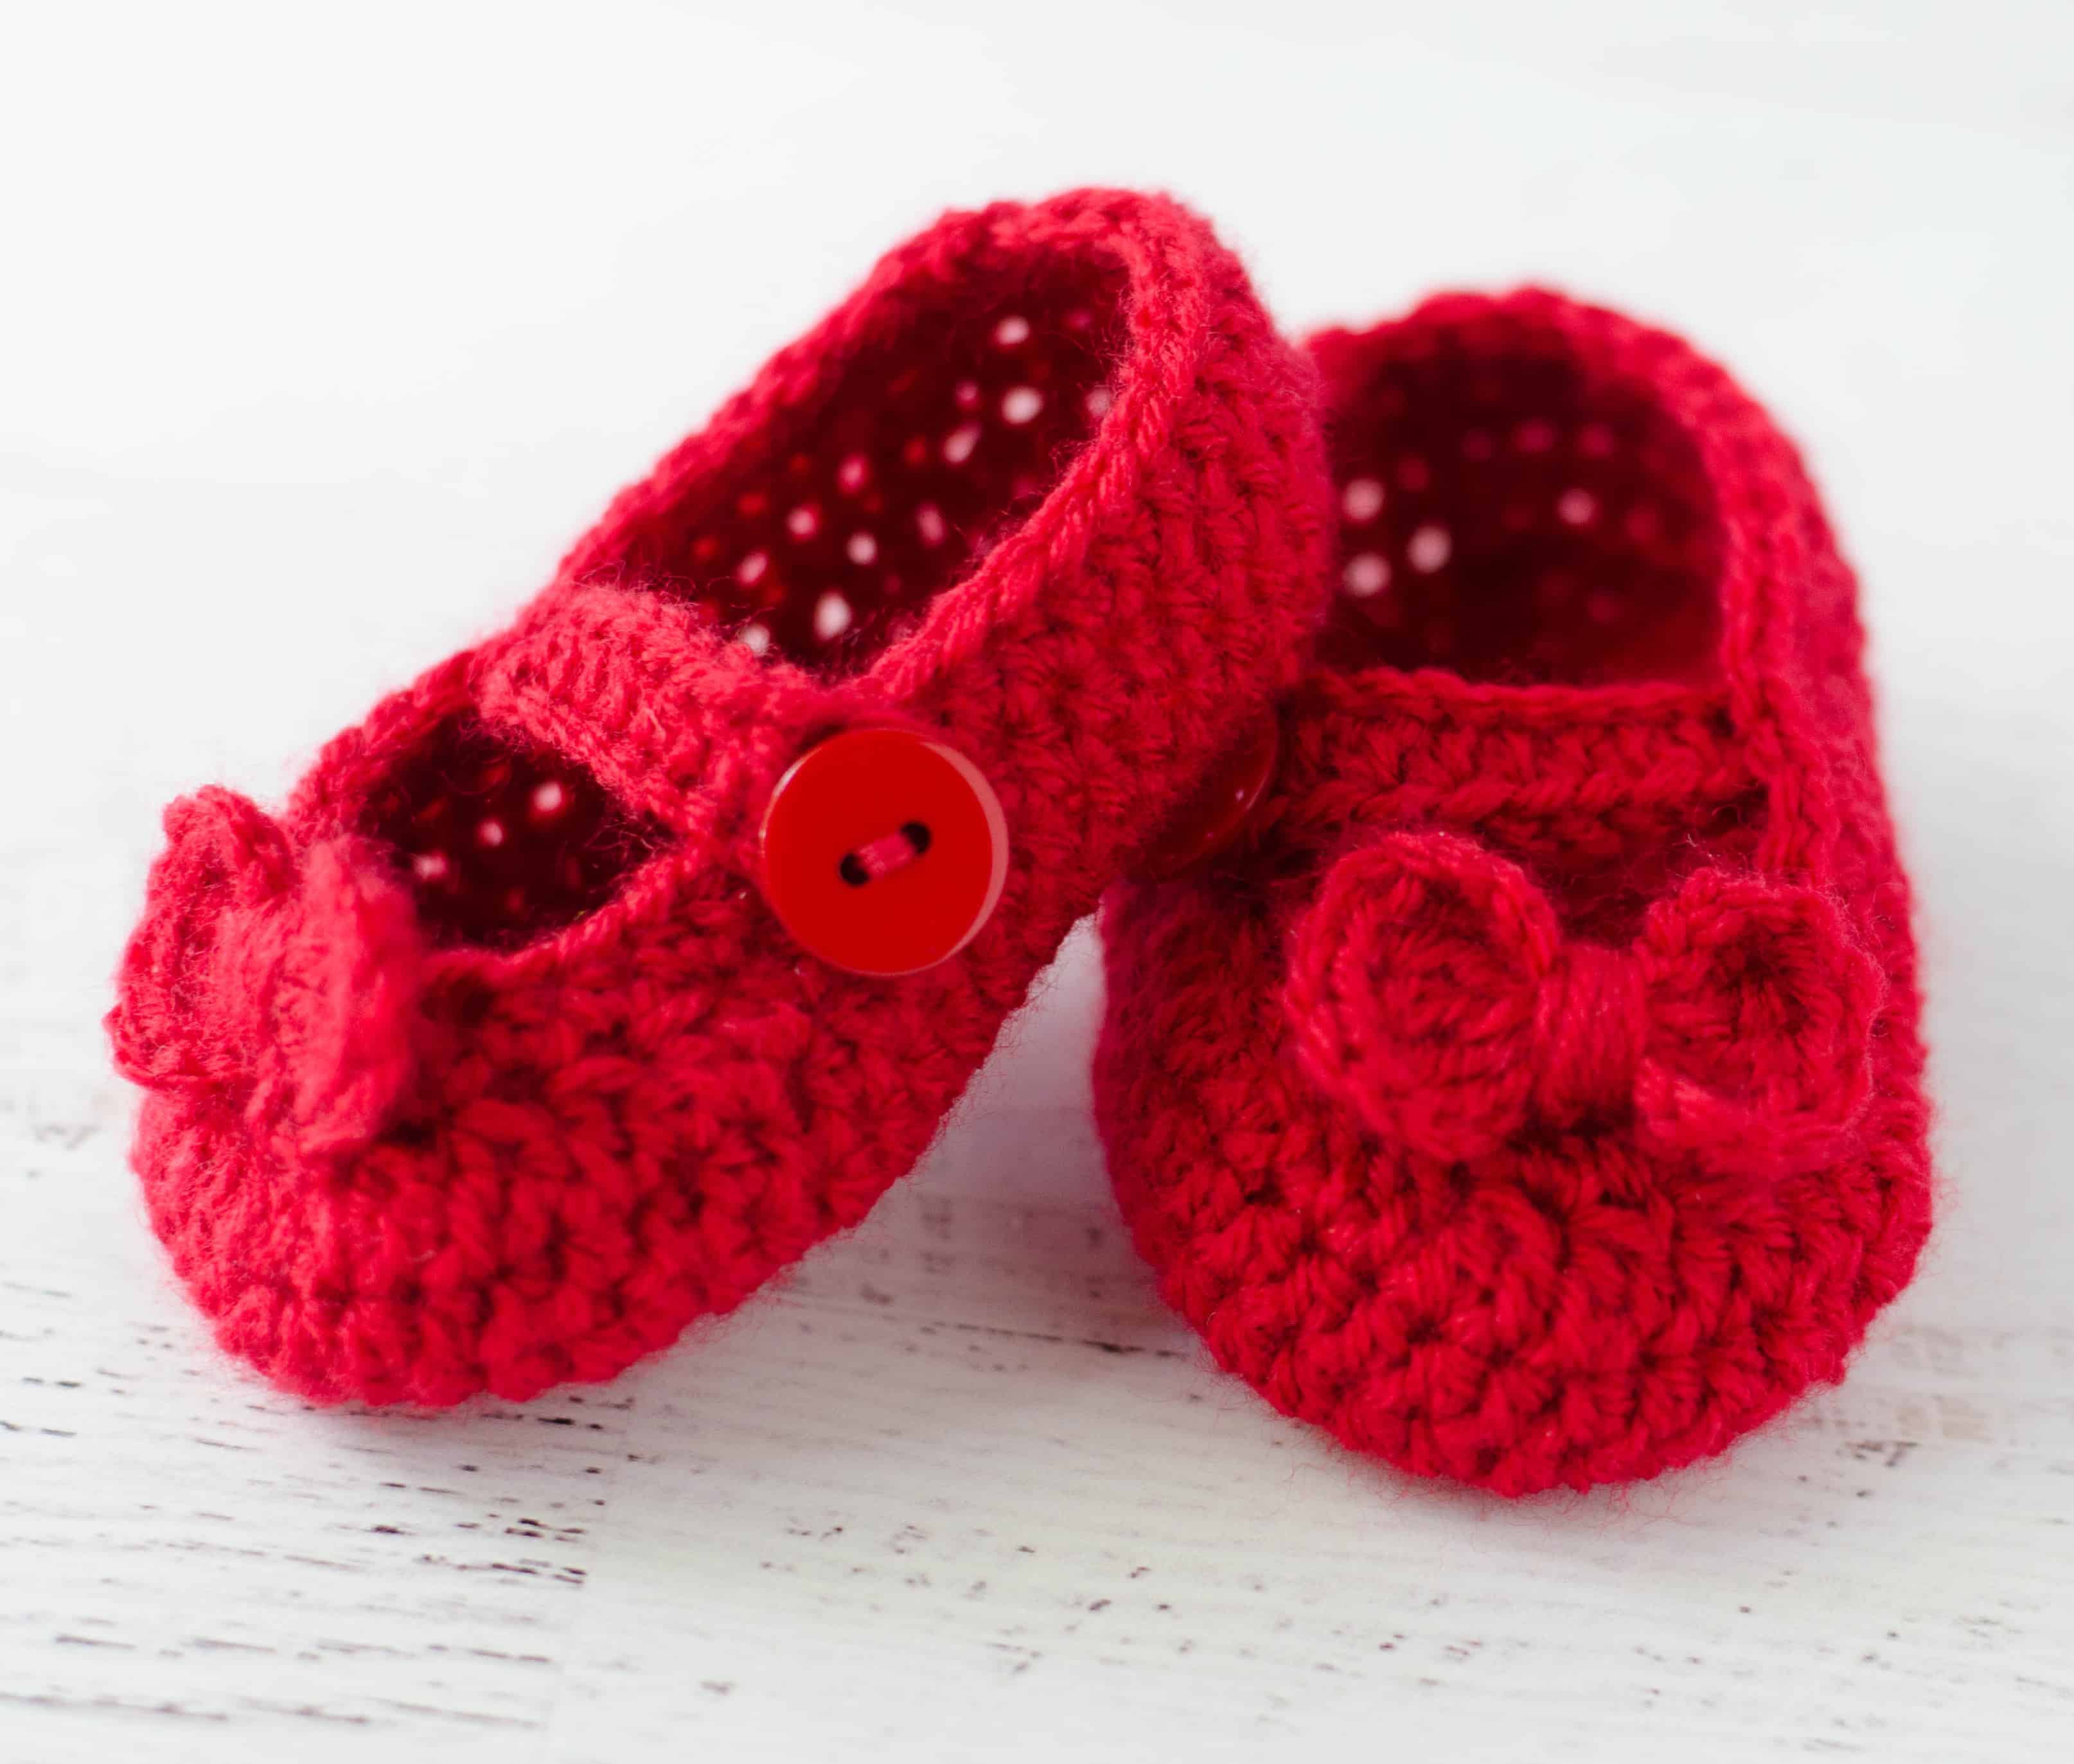 crochet mary jane baby shoes